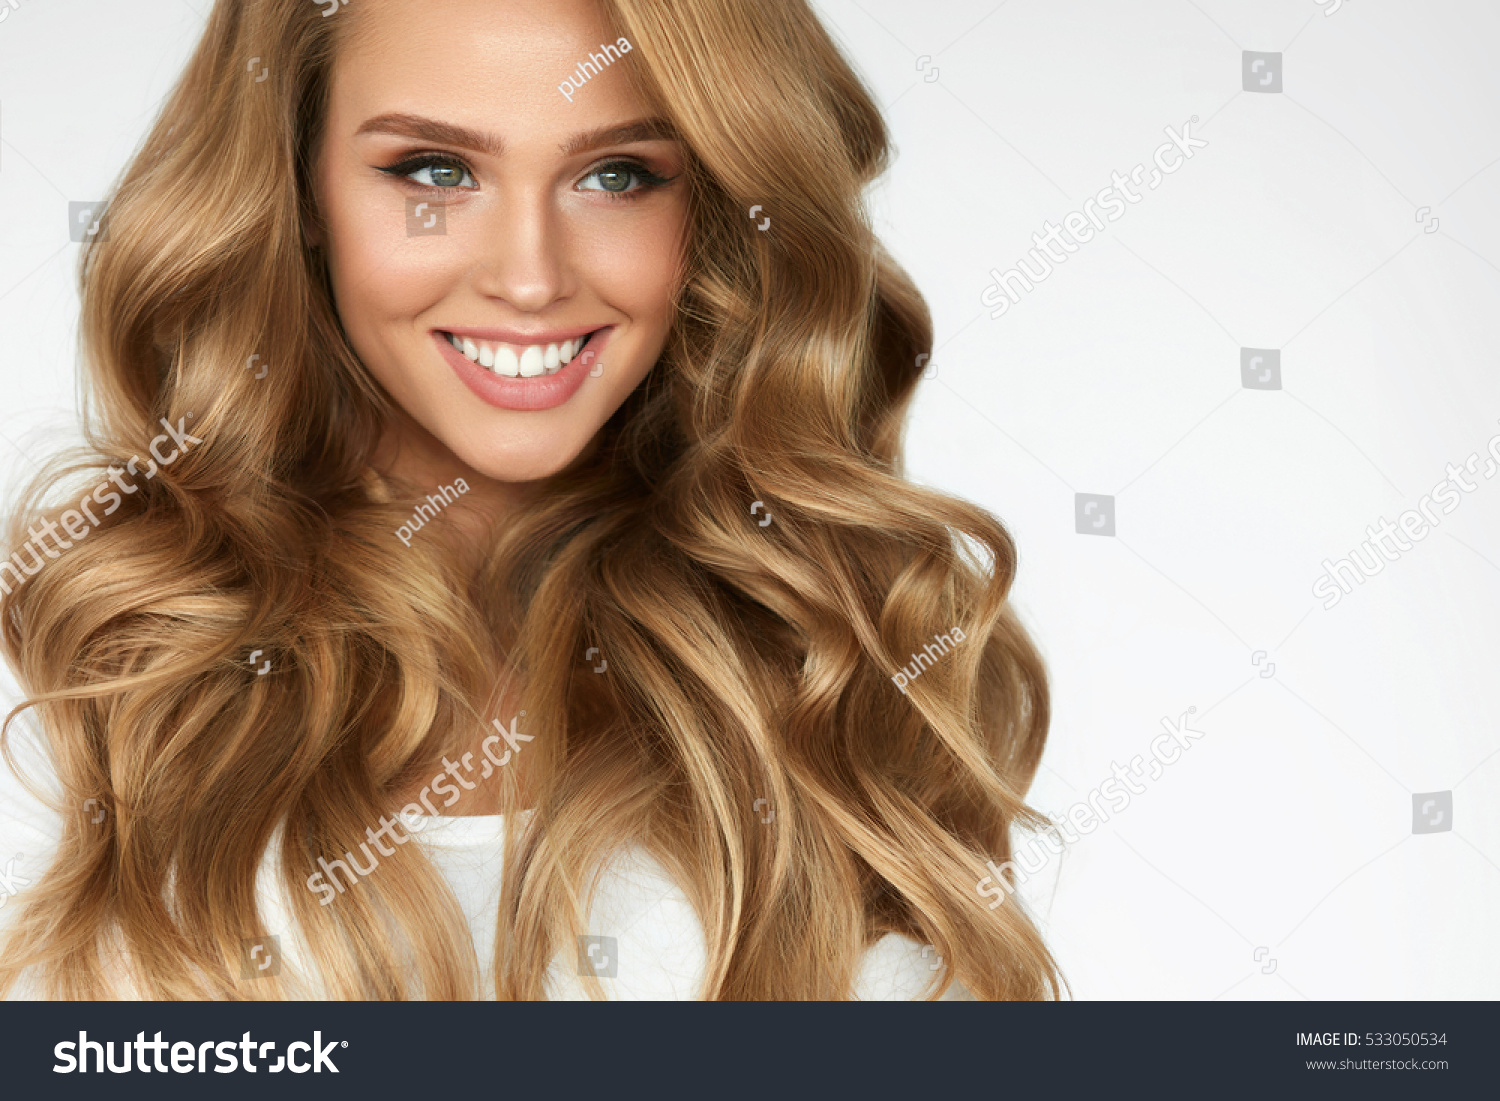 stock-photo-beautiful-curly-hair-smiling-girl-with-healthy-wavy-long-blonde-hair-portrait-happy-woman-with-533050534.jpg